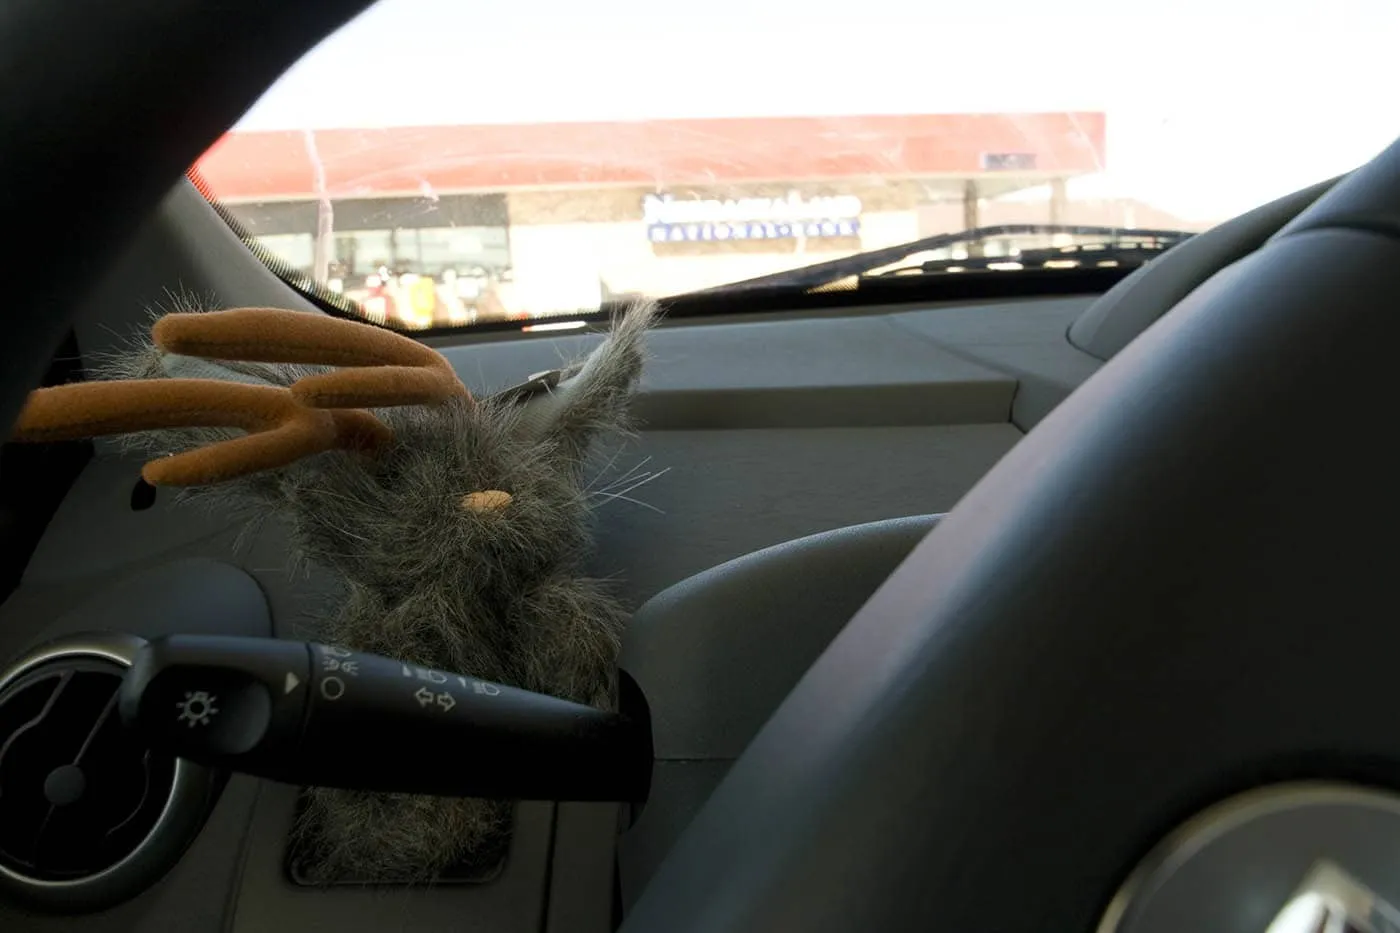 Flopsy the Jackalope - Silly America's jackalope mascot - in his spot in our road trip car.